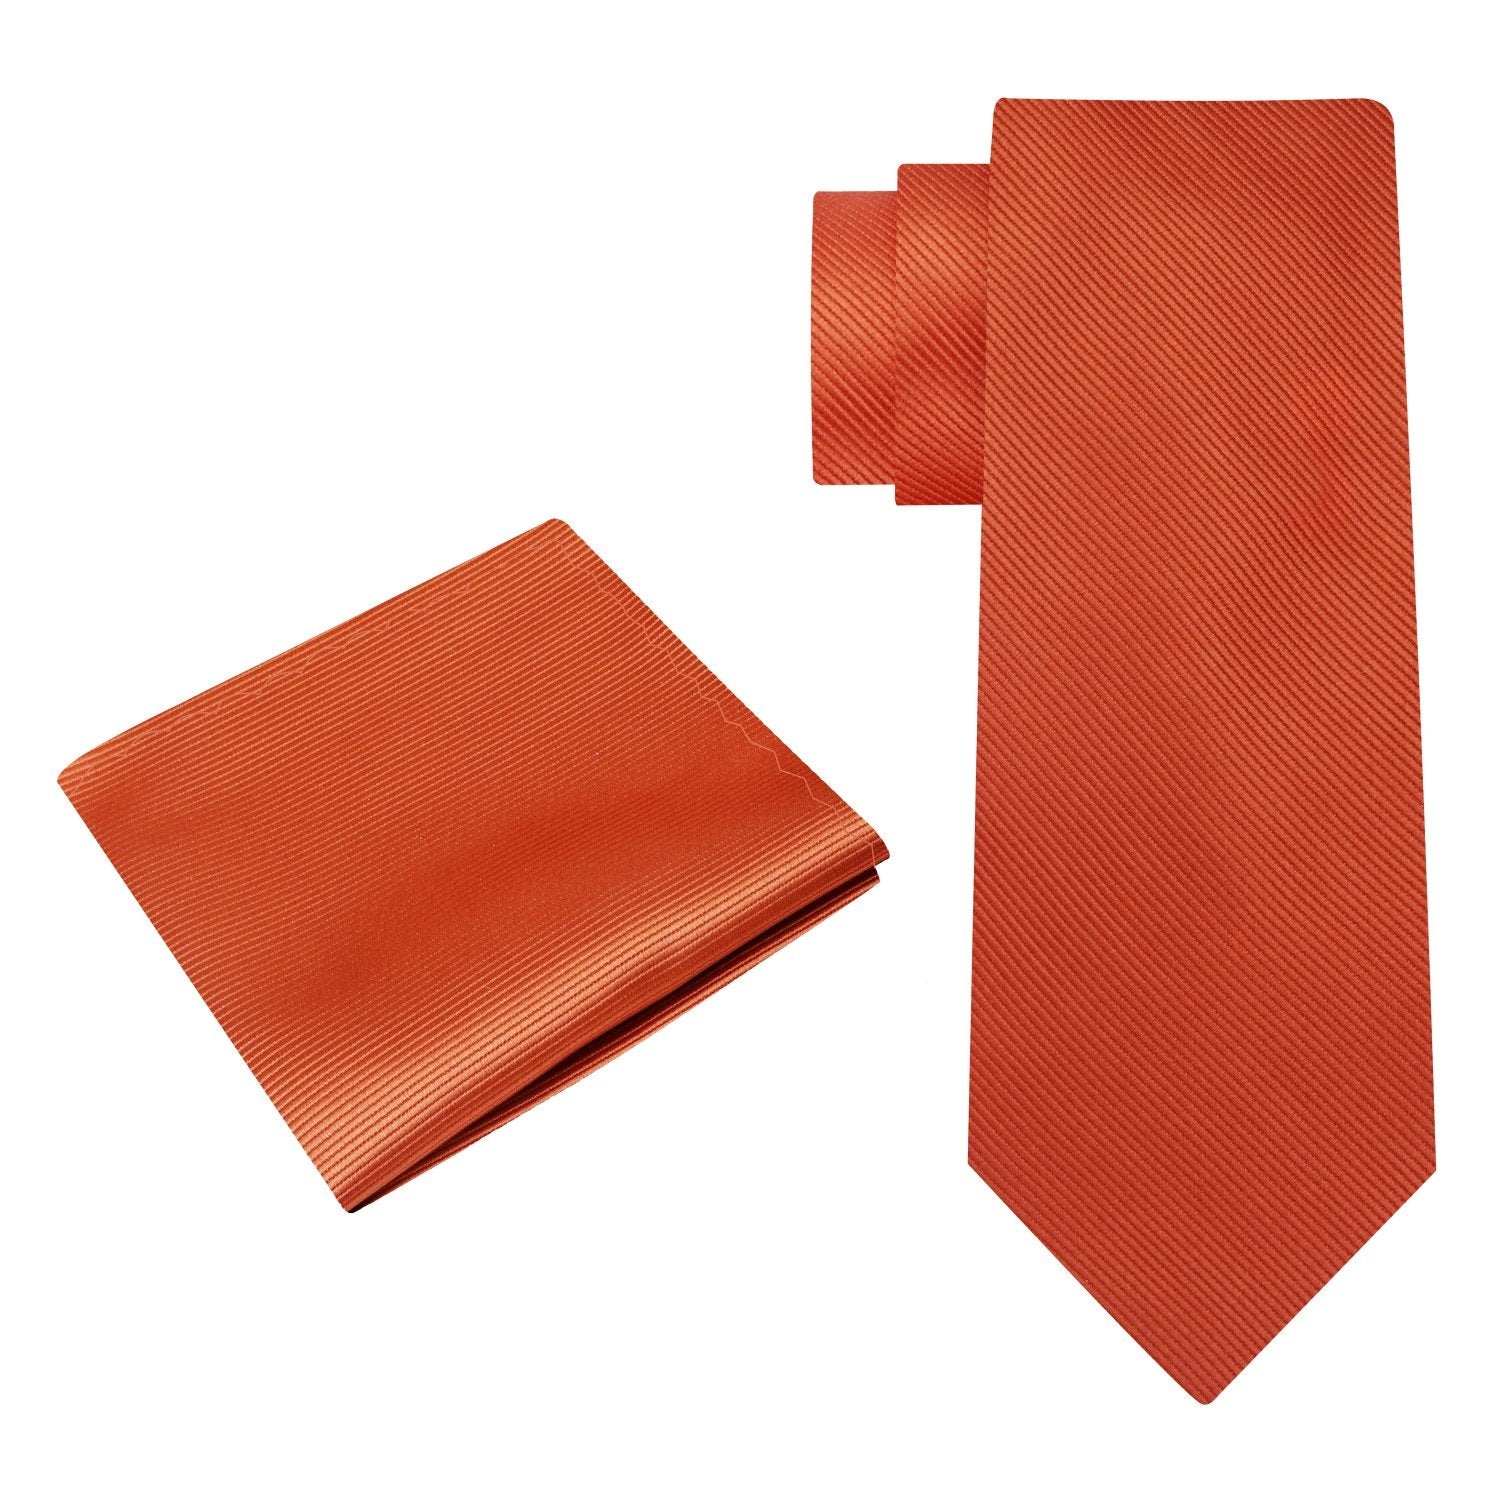 Alt View: A Solid Orange Colored Silk Necktie and Square